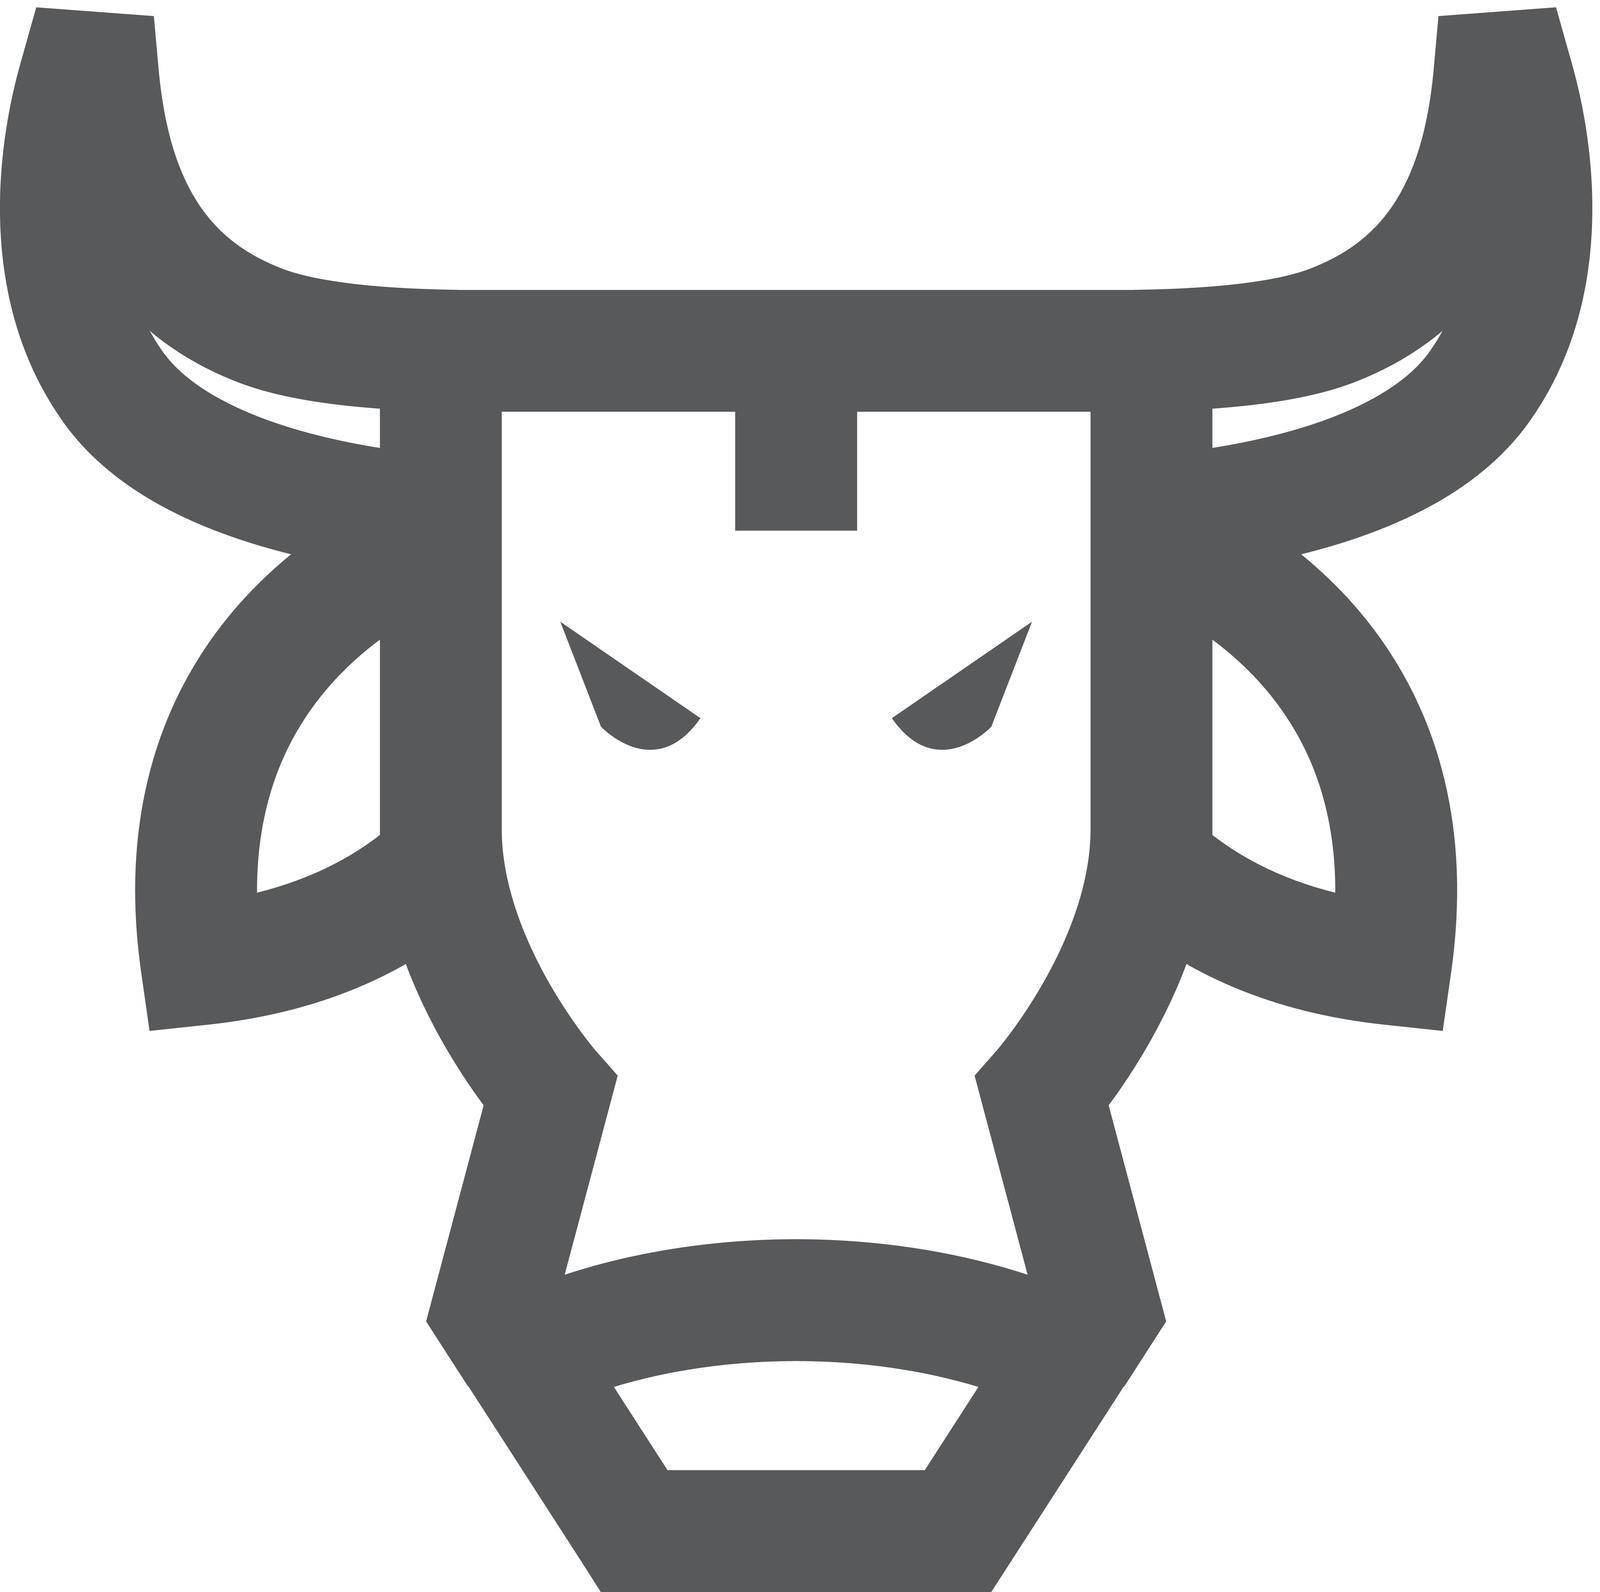 Bullish icon in thick outline style. Black and white monochrome vector illustration.